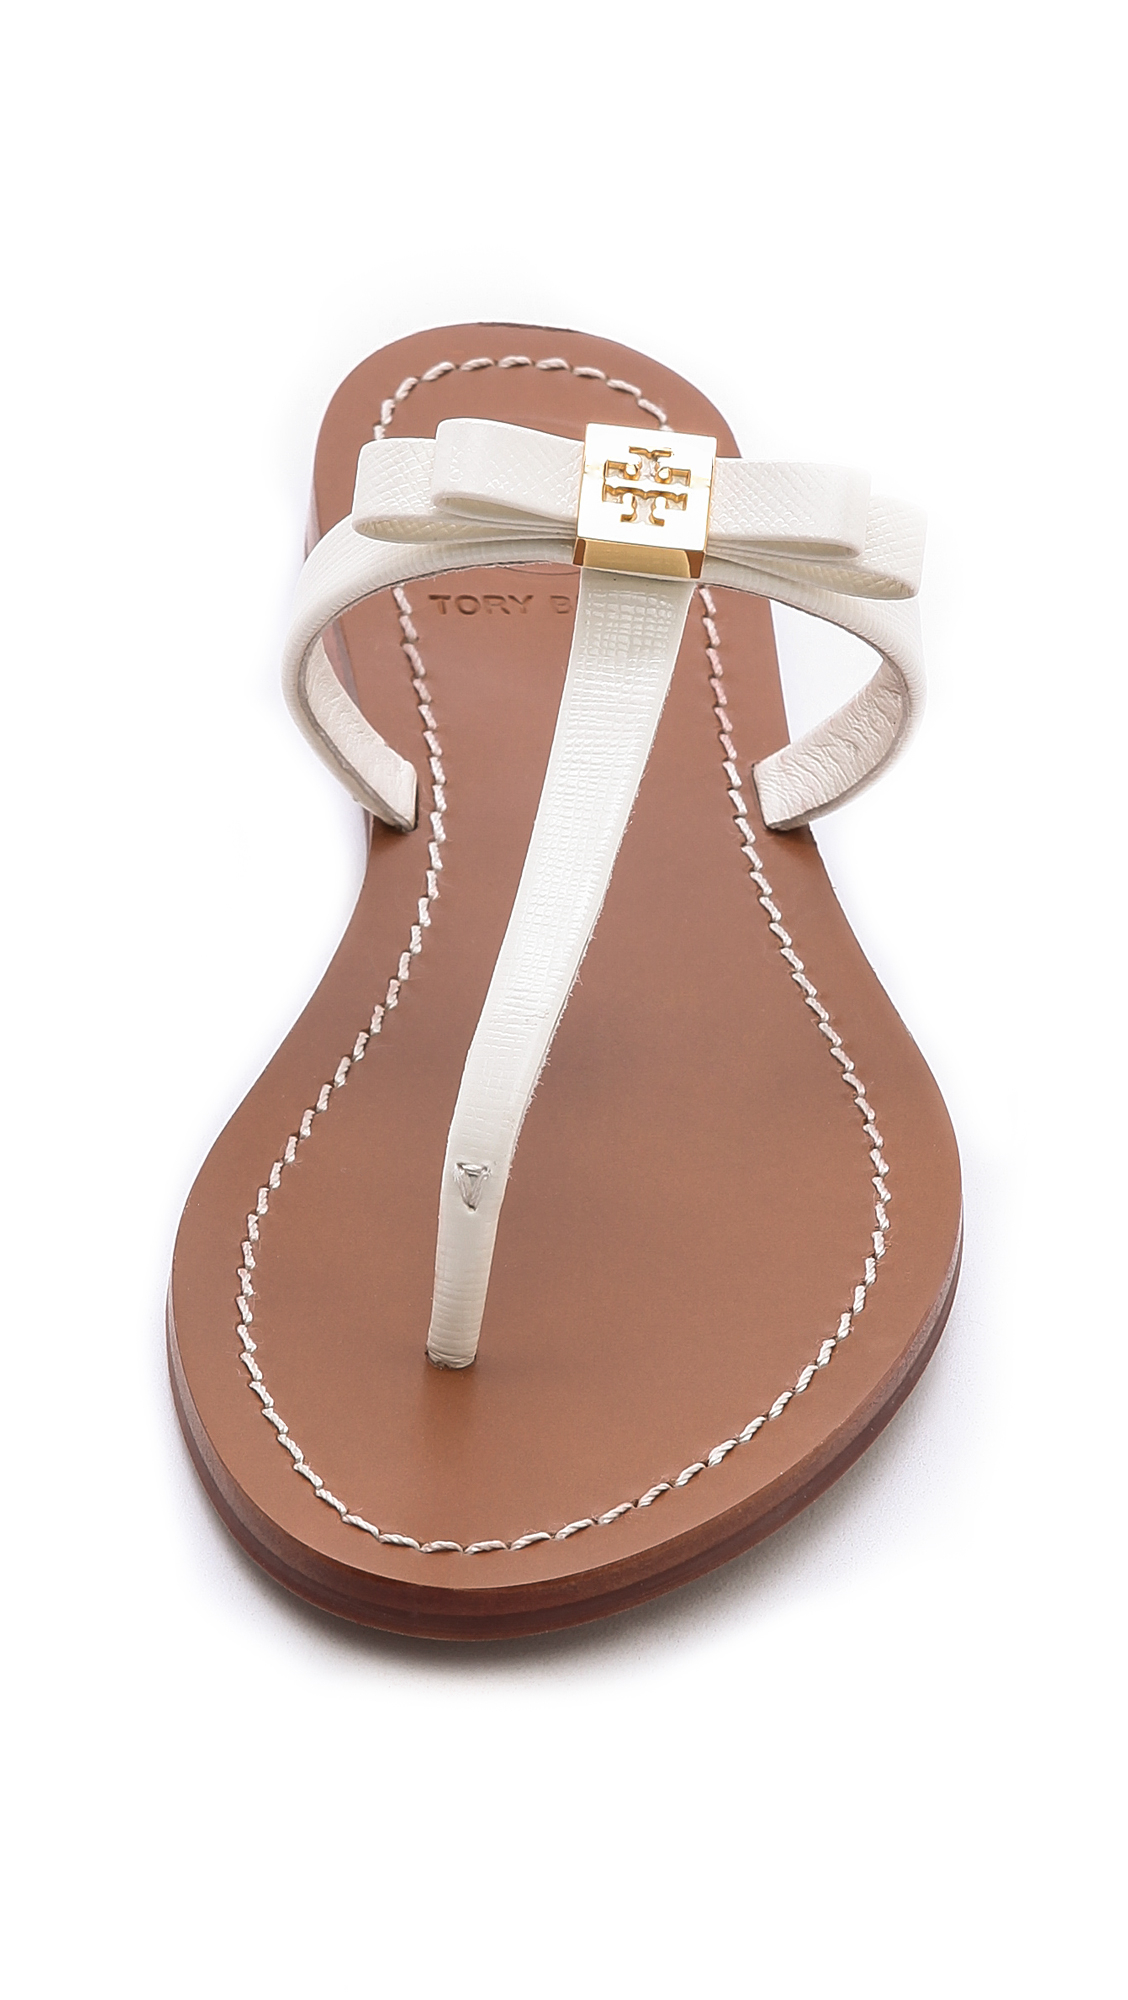 Lyst - Tory Burch Leighanne Sandals in White